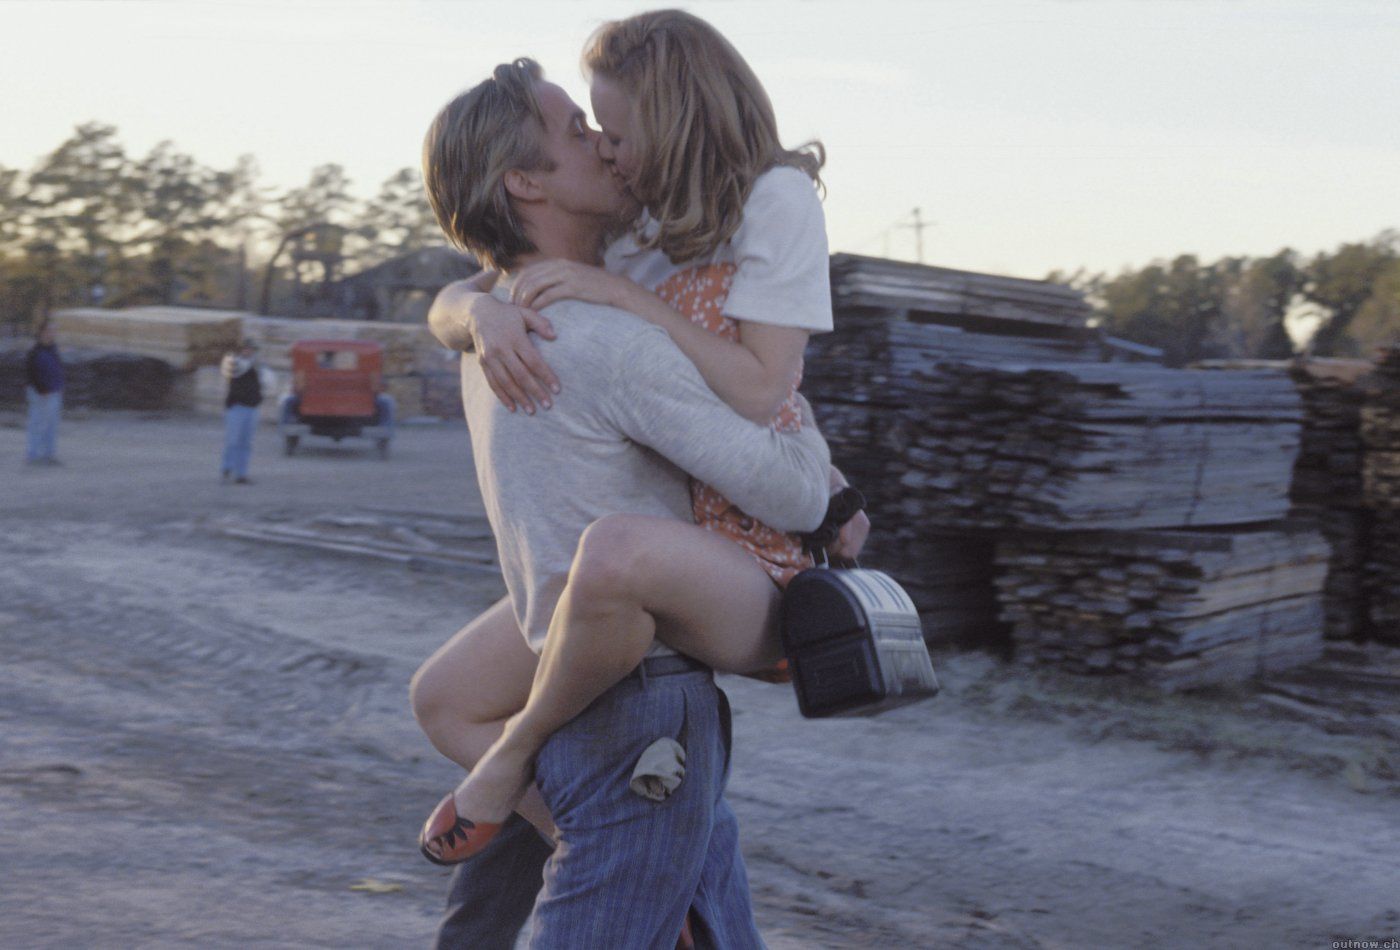 Ryan Gosling And Rachel Mcadams The Notebook Irl Feud Made The Movie Better United States 6522